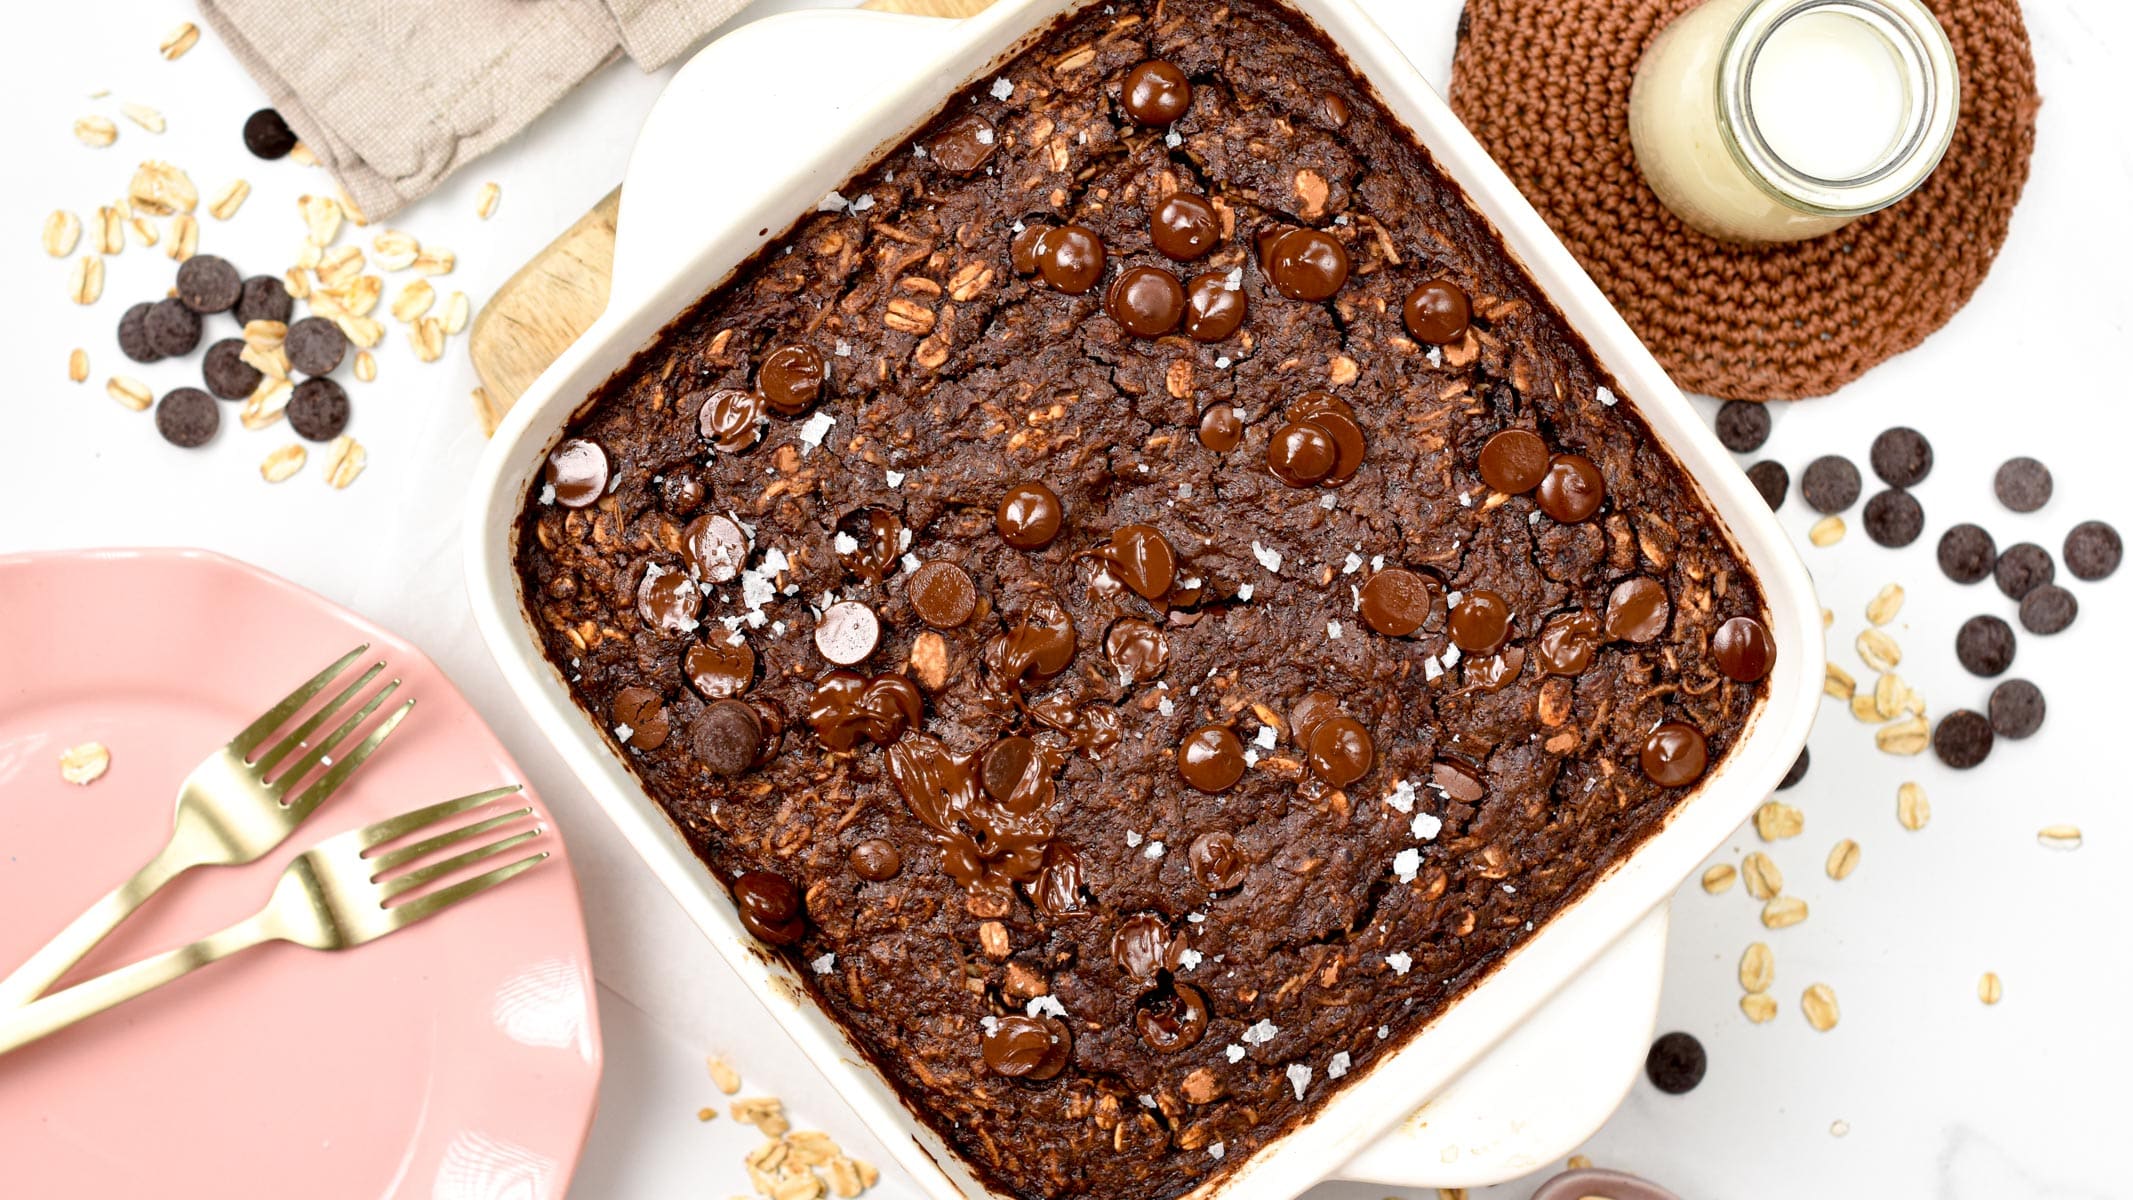 This Baked Brownie Oatmeal is a creamy chocolate baked oatmeal recipe filled packed with 9 grams protein per serve for a fulfilling healthy breakfast. Plus, this easy oatmeal recipe has allergy friendly option to be vegan, egg-free and dairy-free if desired.